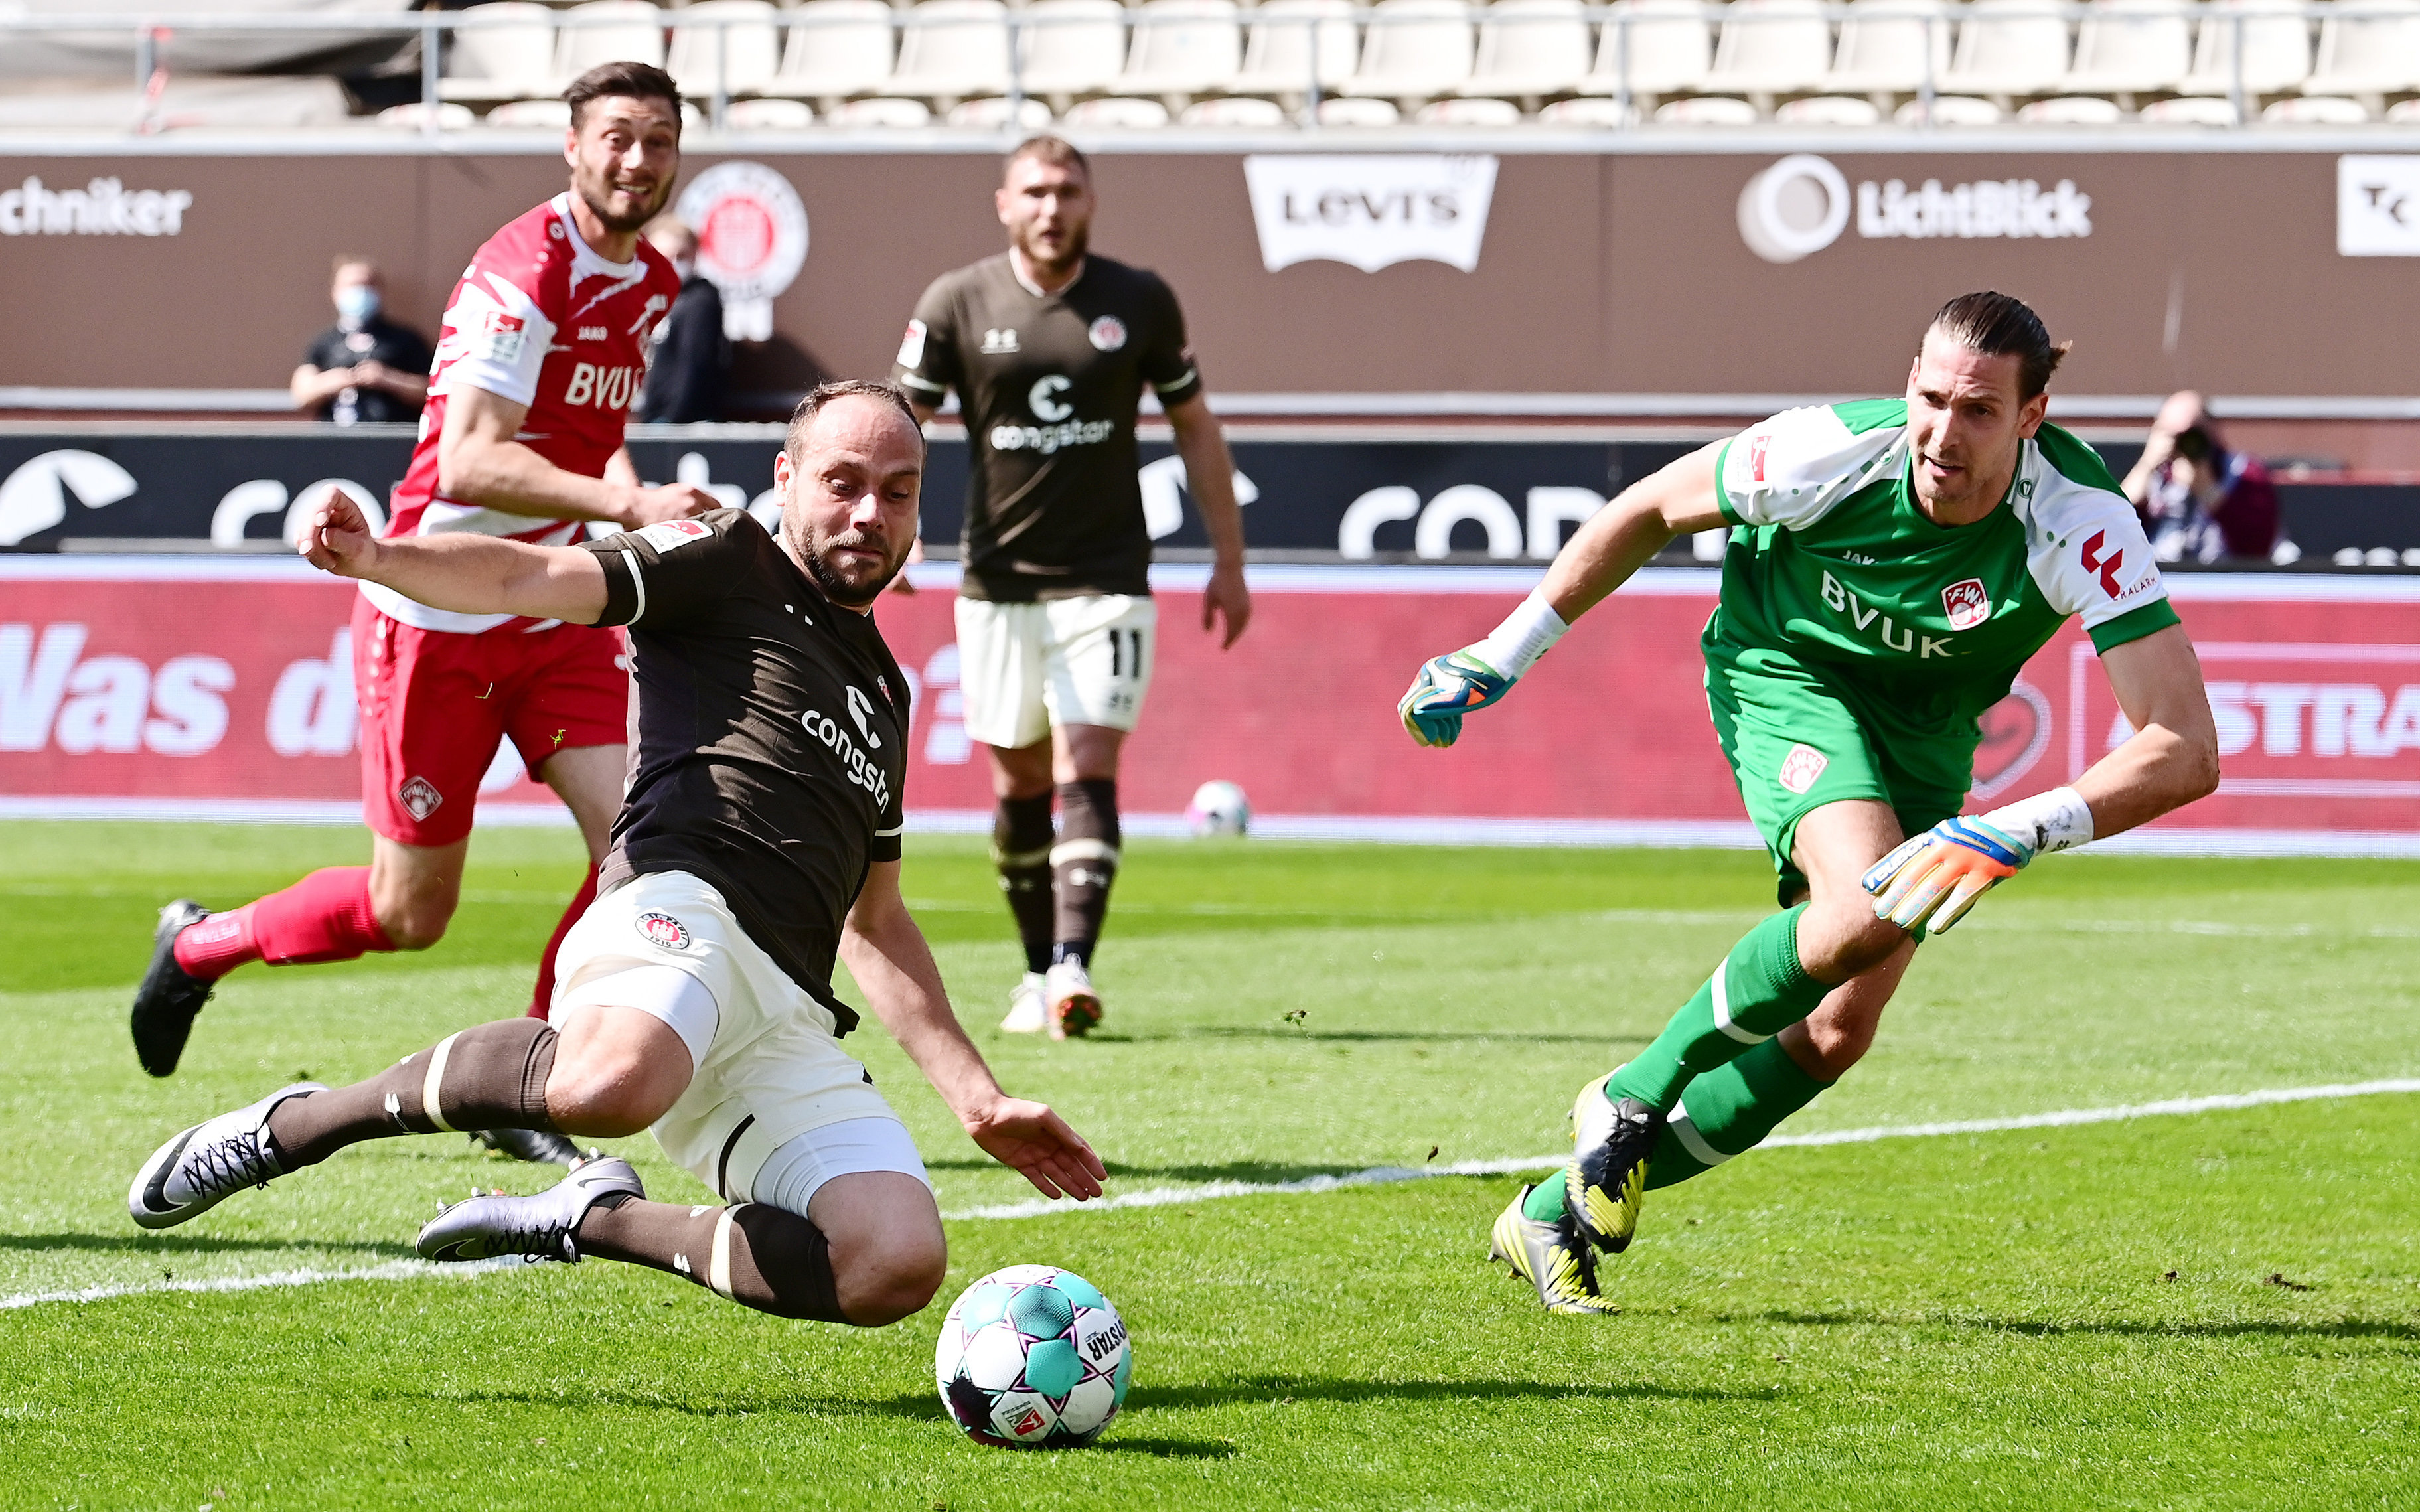 As in the reverse fixture, Rico Benatelli got on the scoresheet against Würzburg, reacting first to slide the ball over the line in the 18th minute.